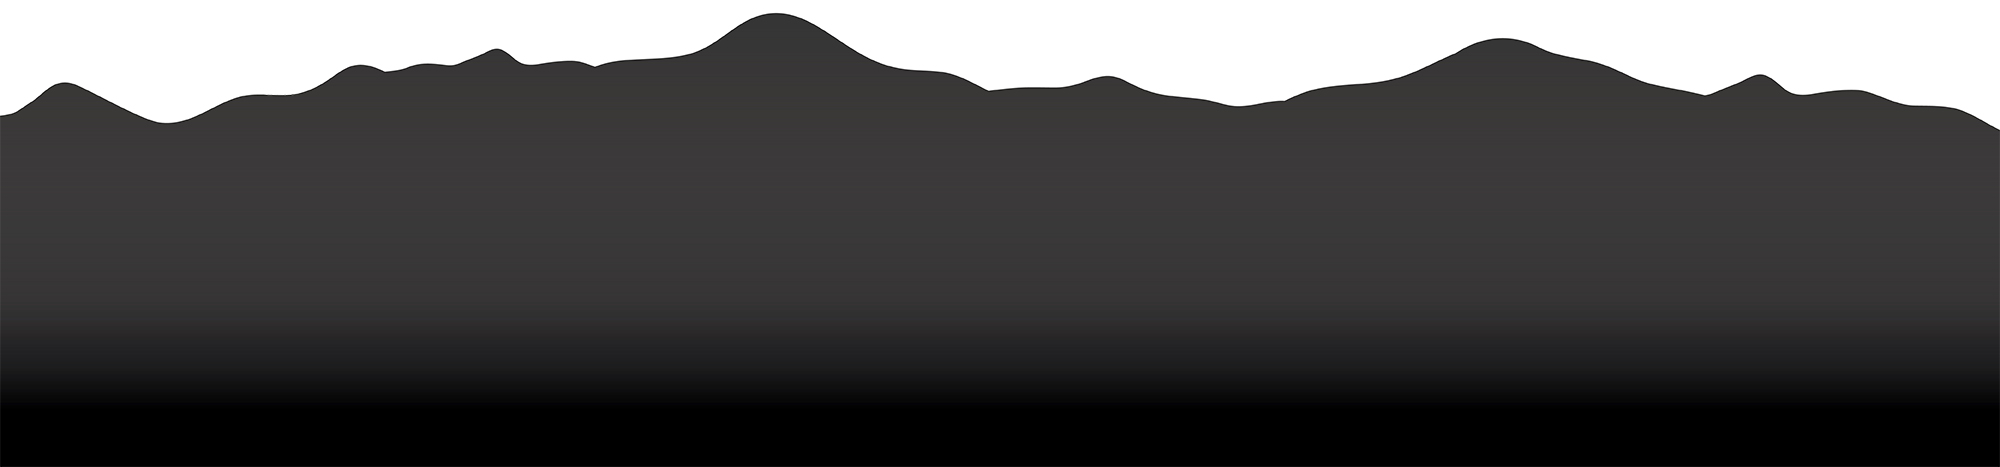 Footer Background - silhouette of black hills